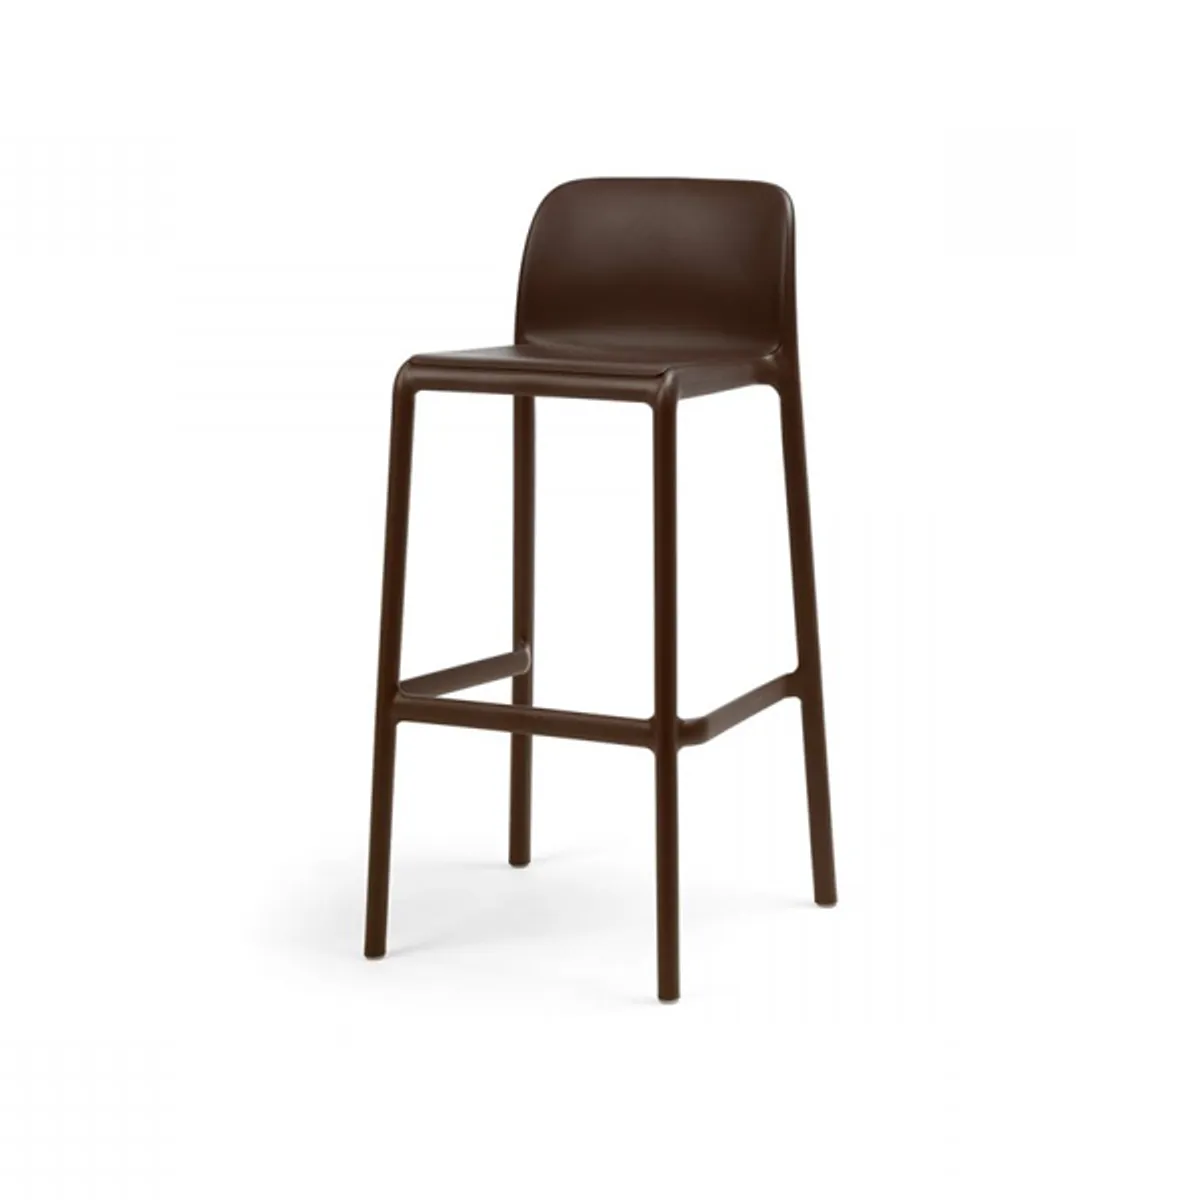 Faro bar stool Inside Out Contracts4